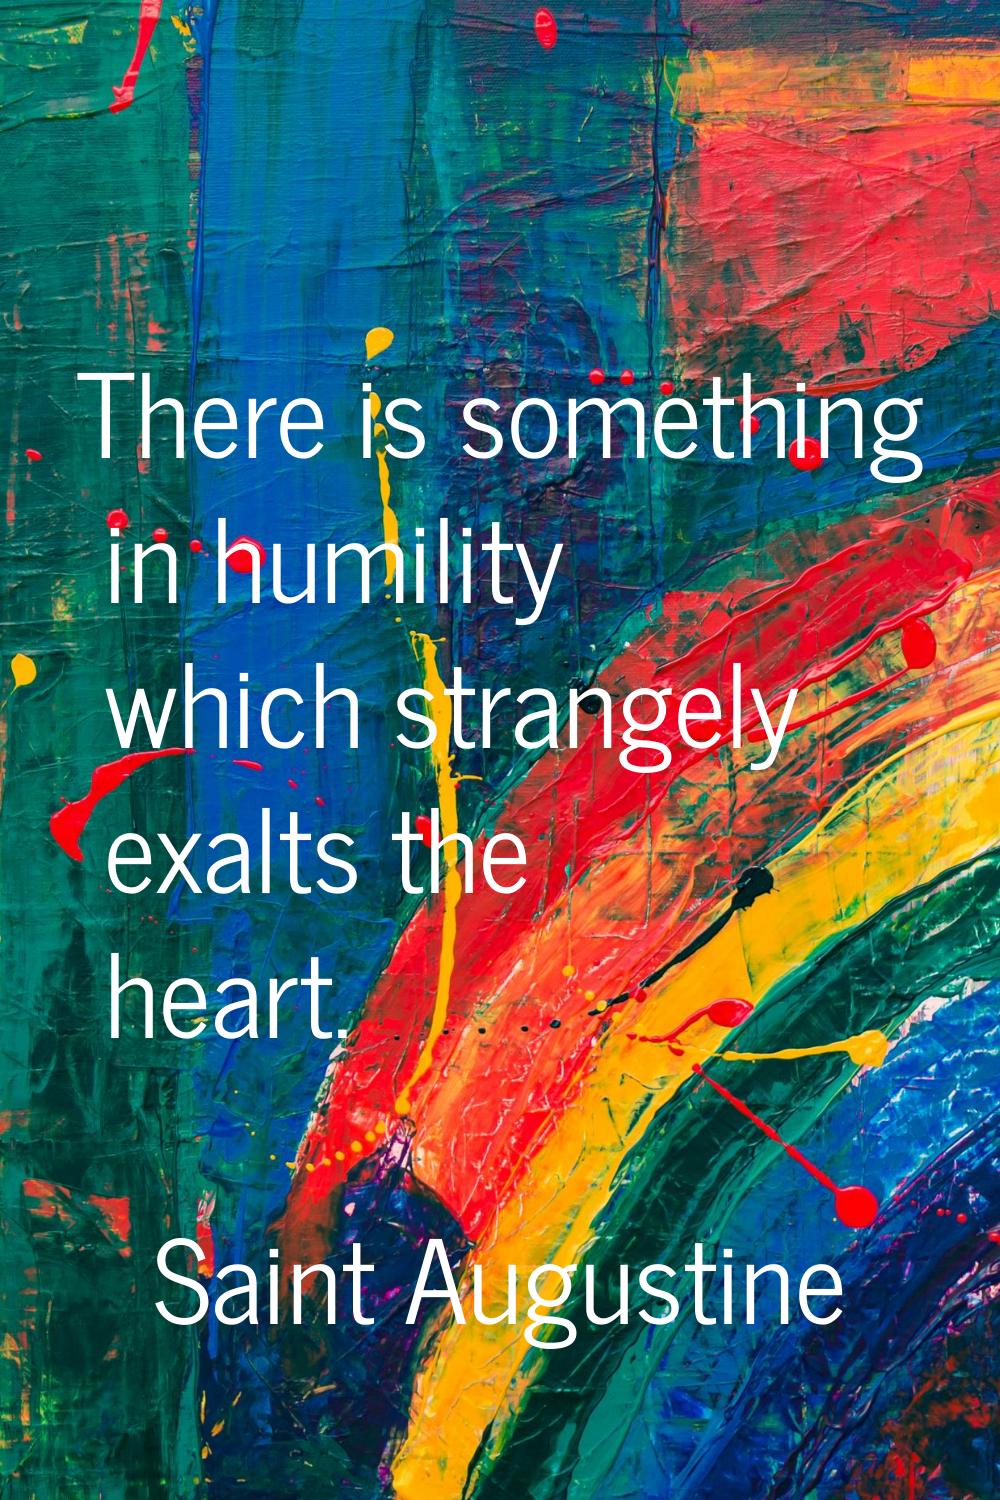 There is something in humility which strangely exalts the heart.